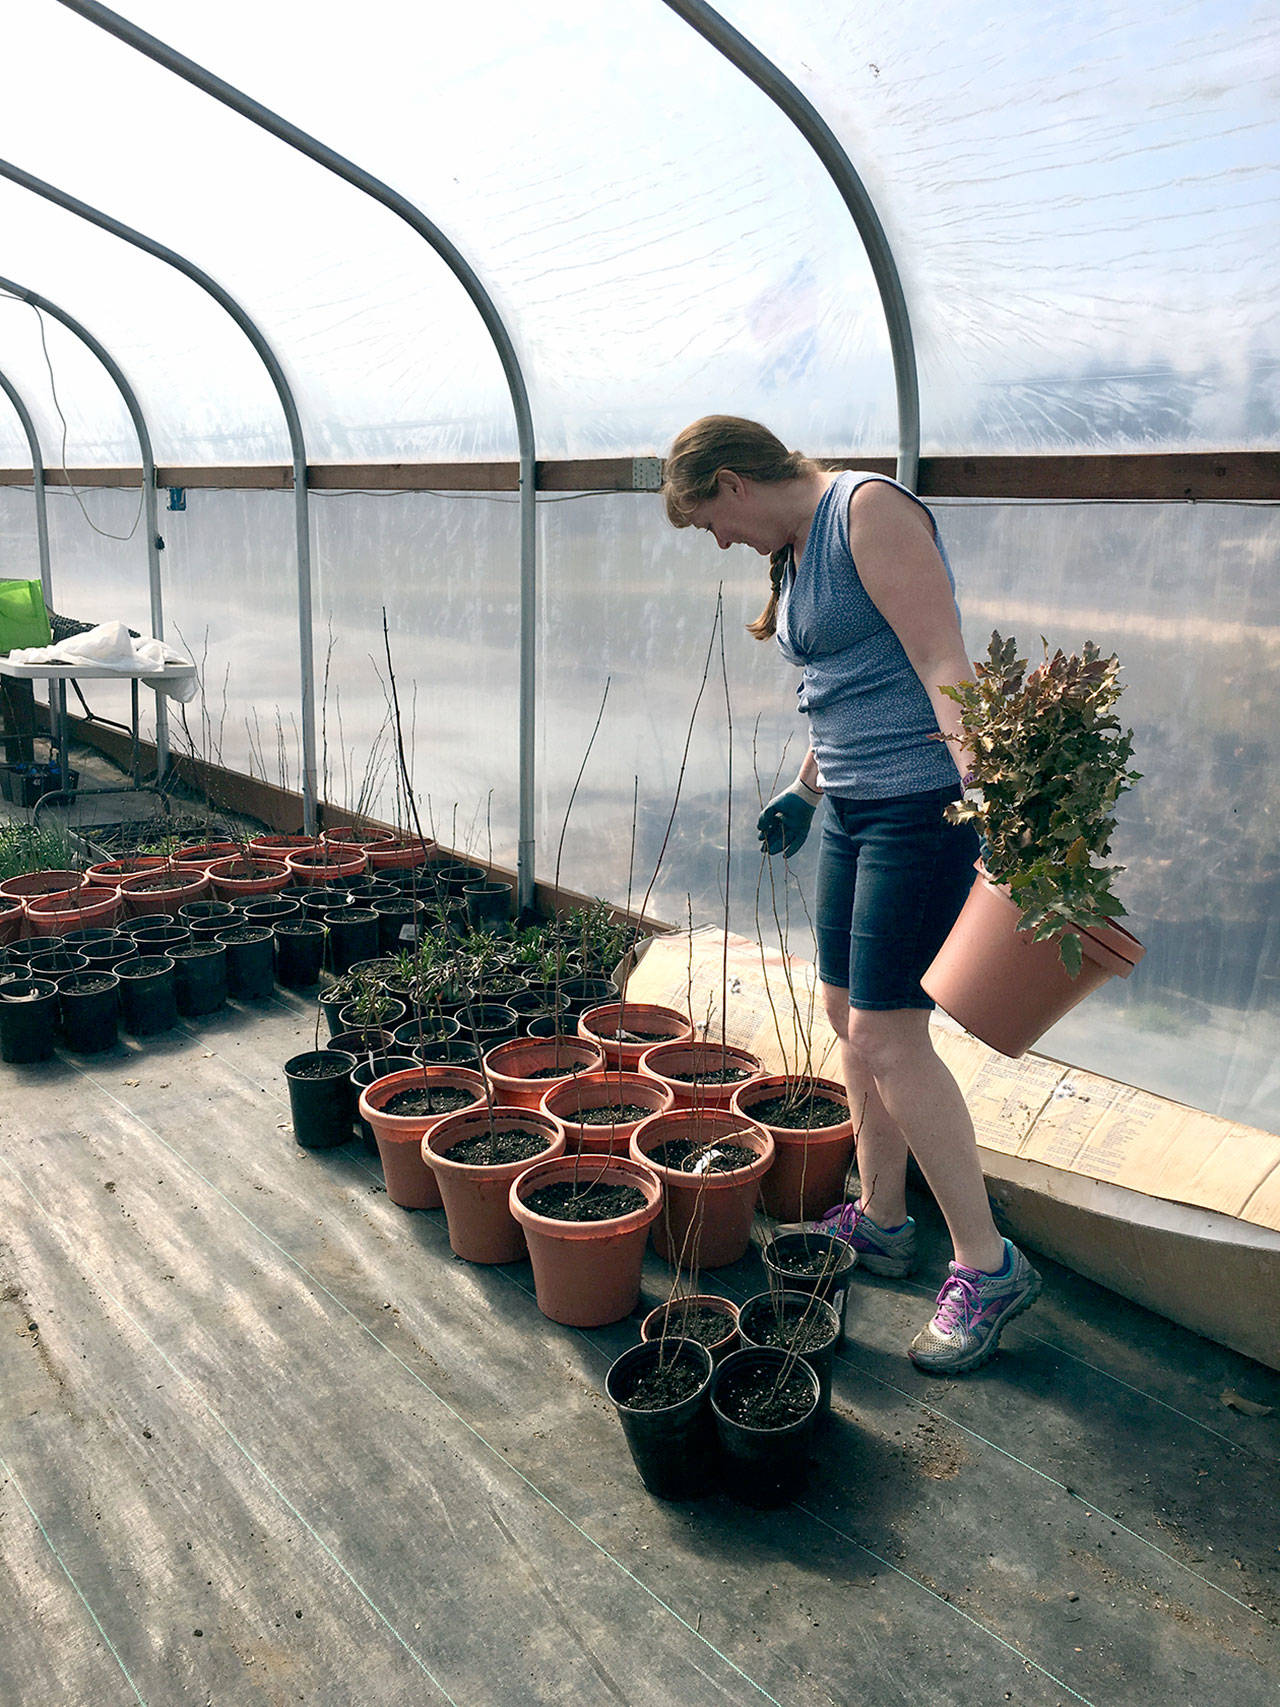 Brenda Lasorsa readies plants for the annual plant sale of the Master Gardeners of Clallam County, which is set for Saturday at the Master Gardener Demonstration Gardens at 2711 Woodcock Road in Sequim. (Karen Teig)